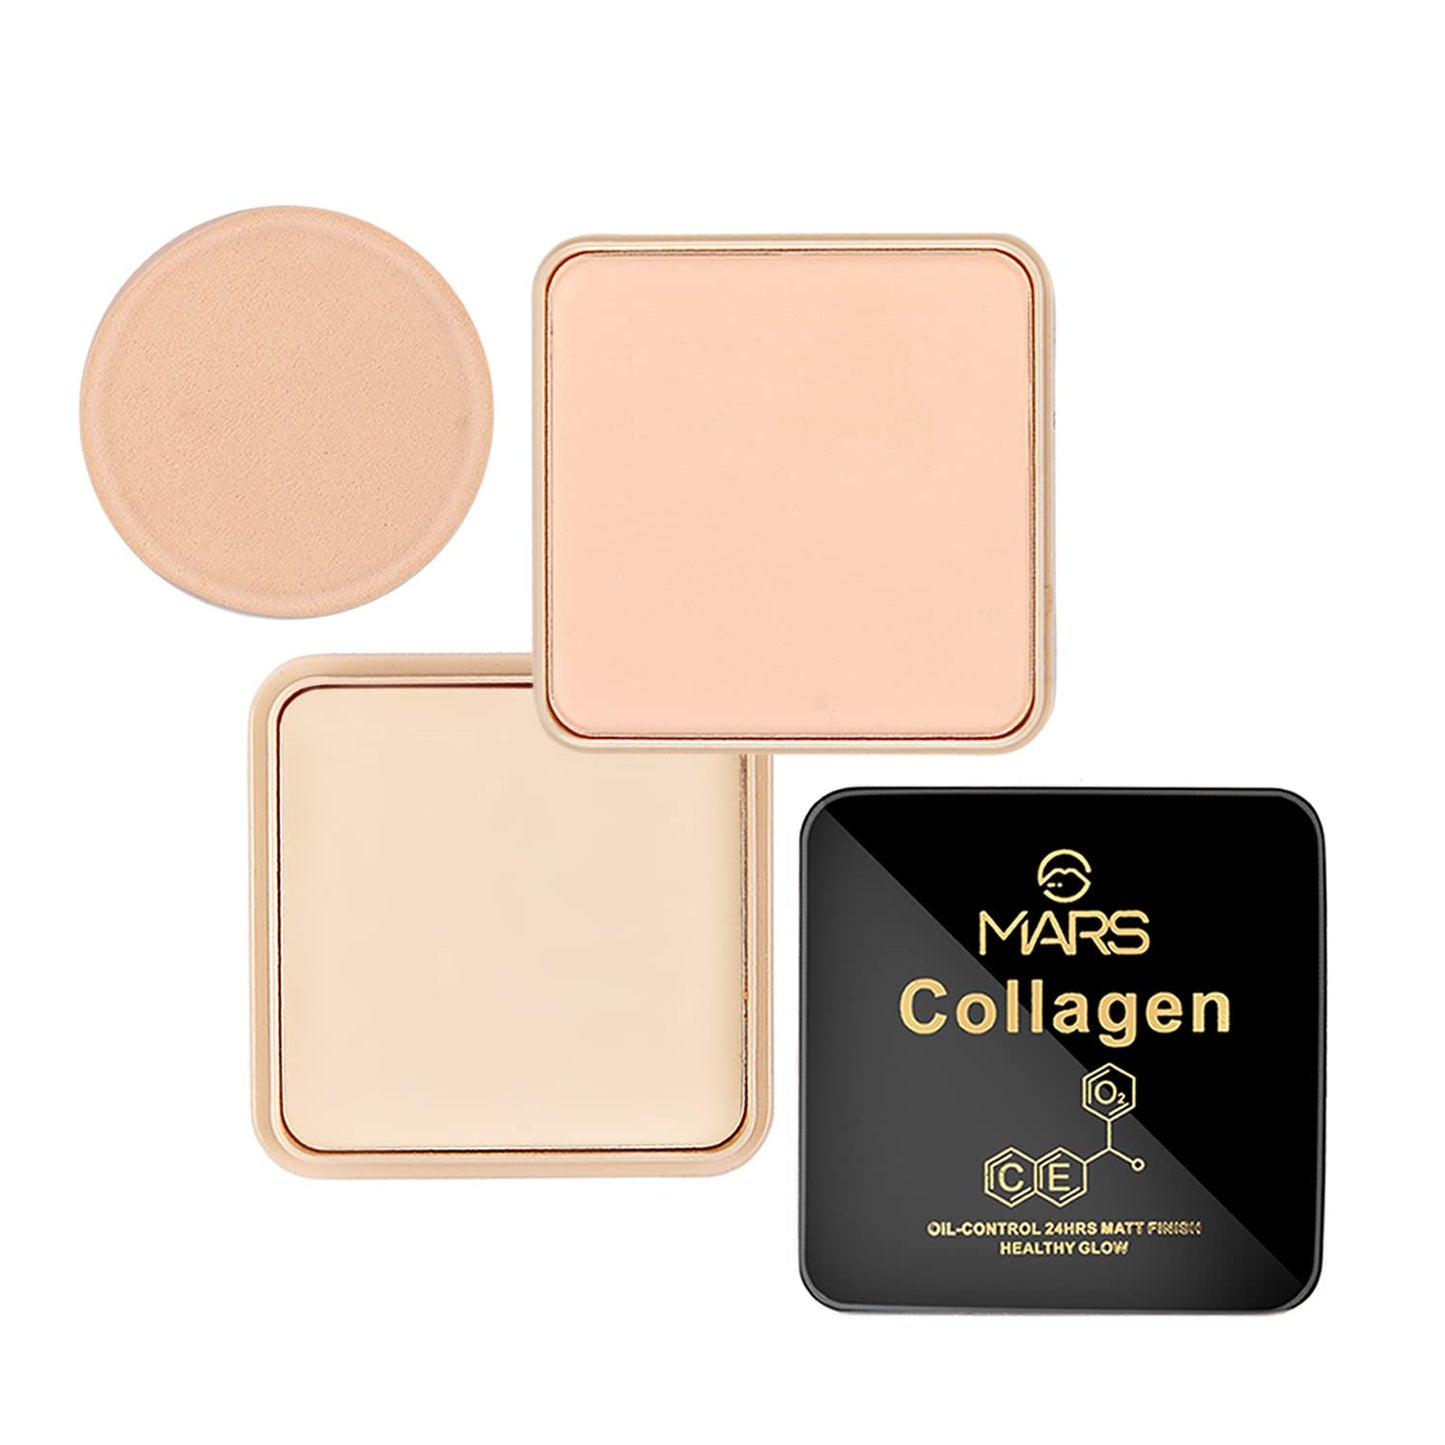 MARS Oll-Control 24 Hrs Matte Finish Healthy Glow Compact Powder Compact 20g Shade-01